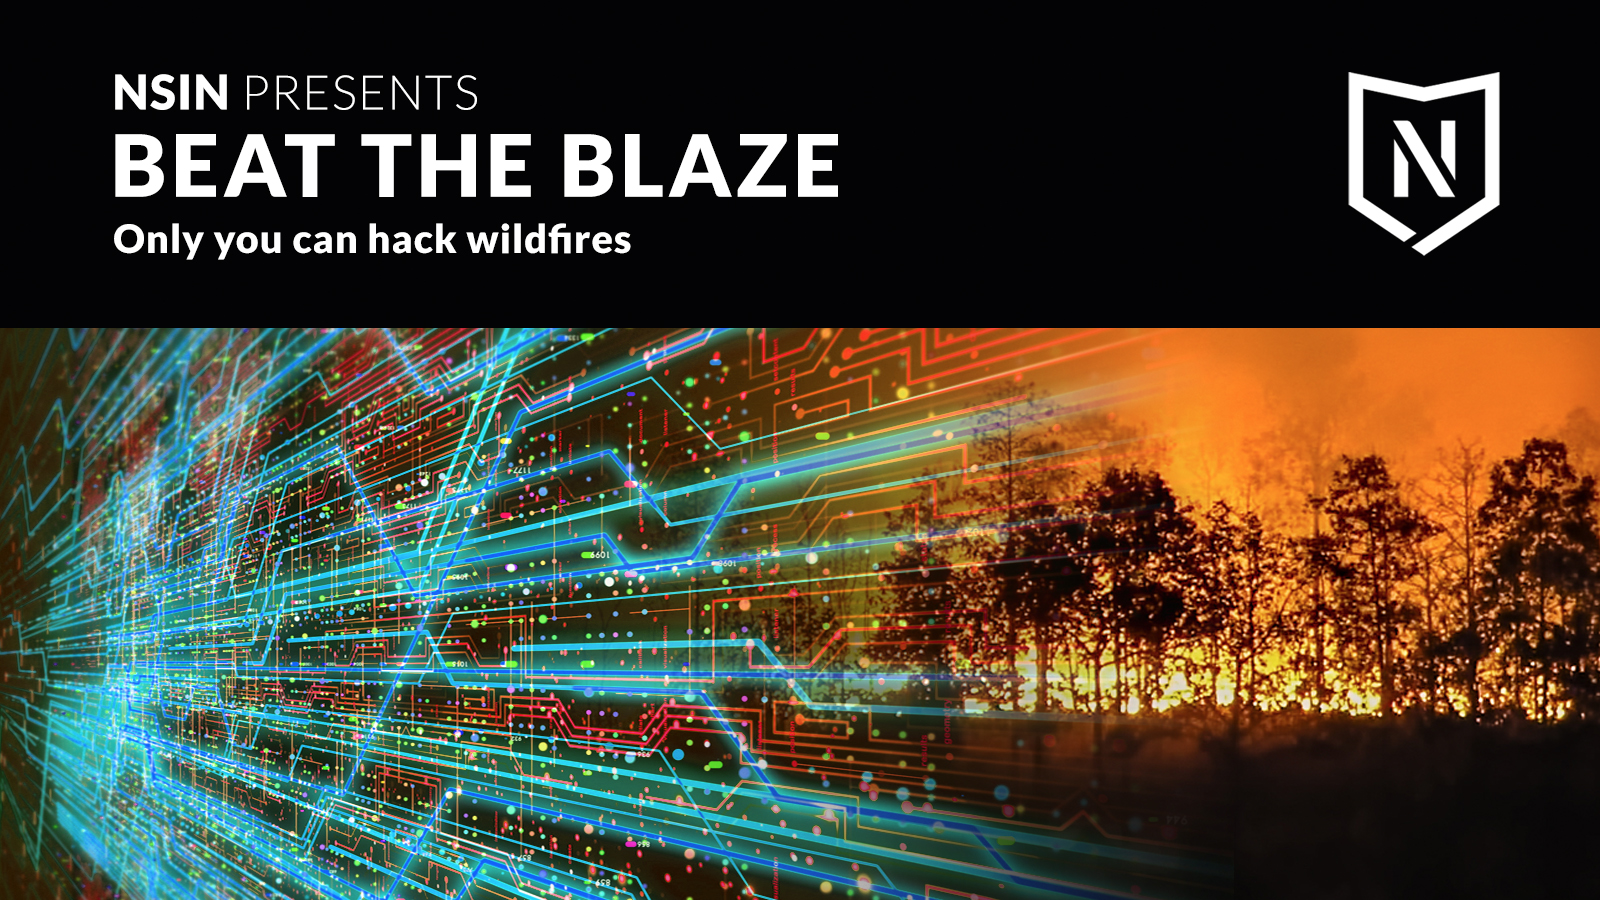 NSIN Hacks present Beat the Blaze: Only you can Hack wildfires